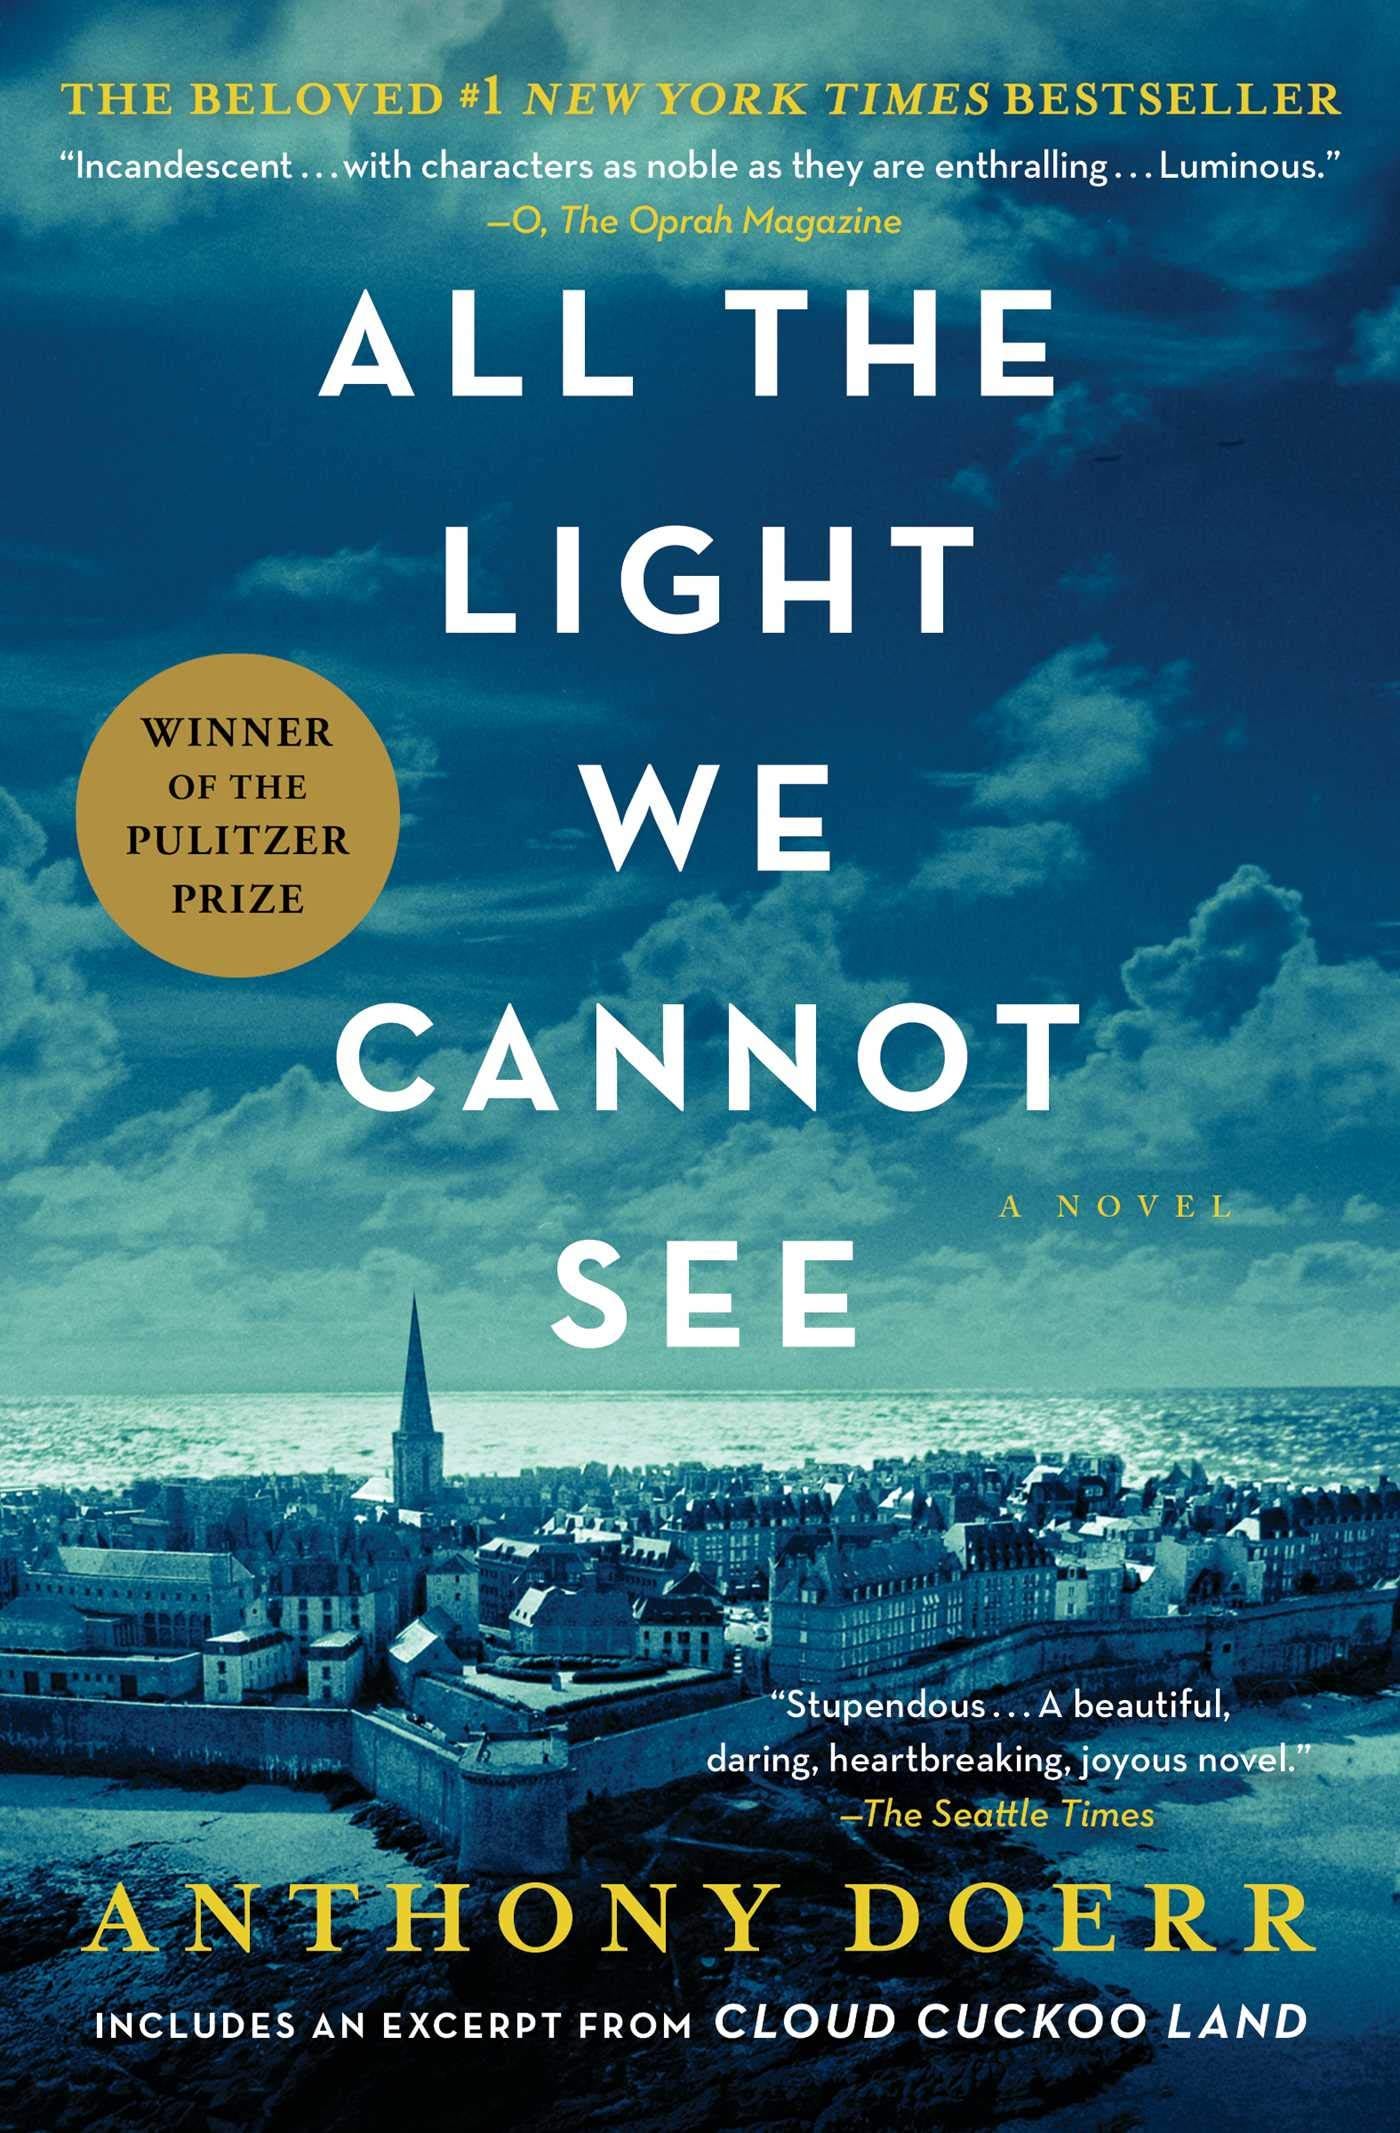 Mini Review: All the Light We Cannot See - The Restful Home